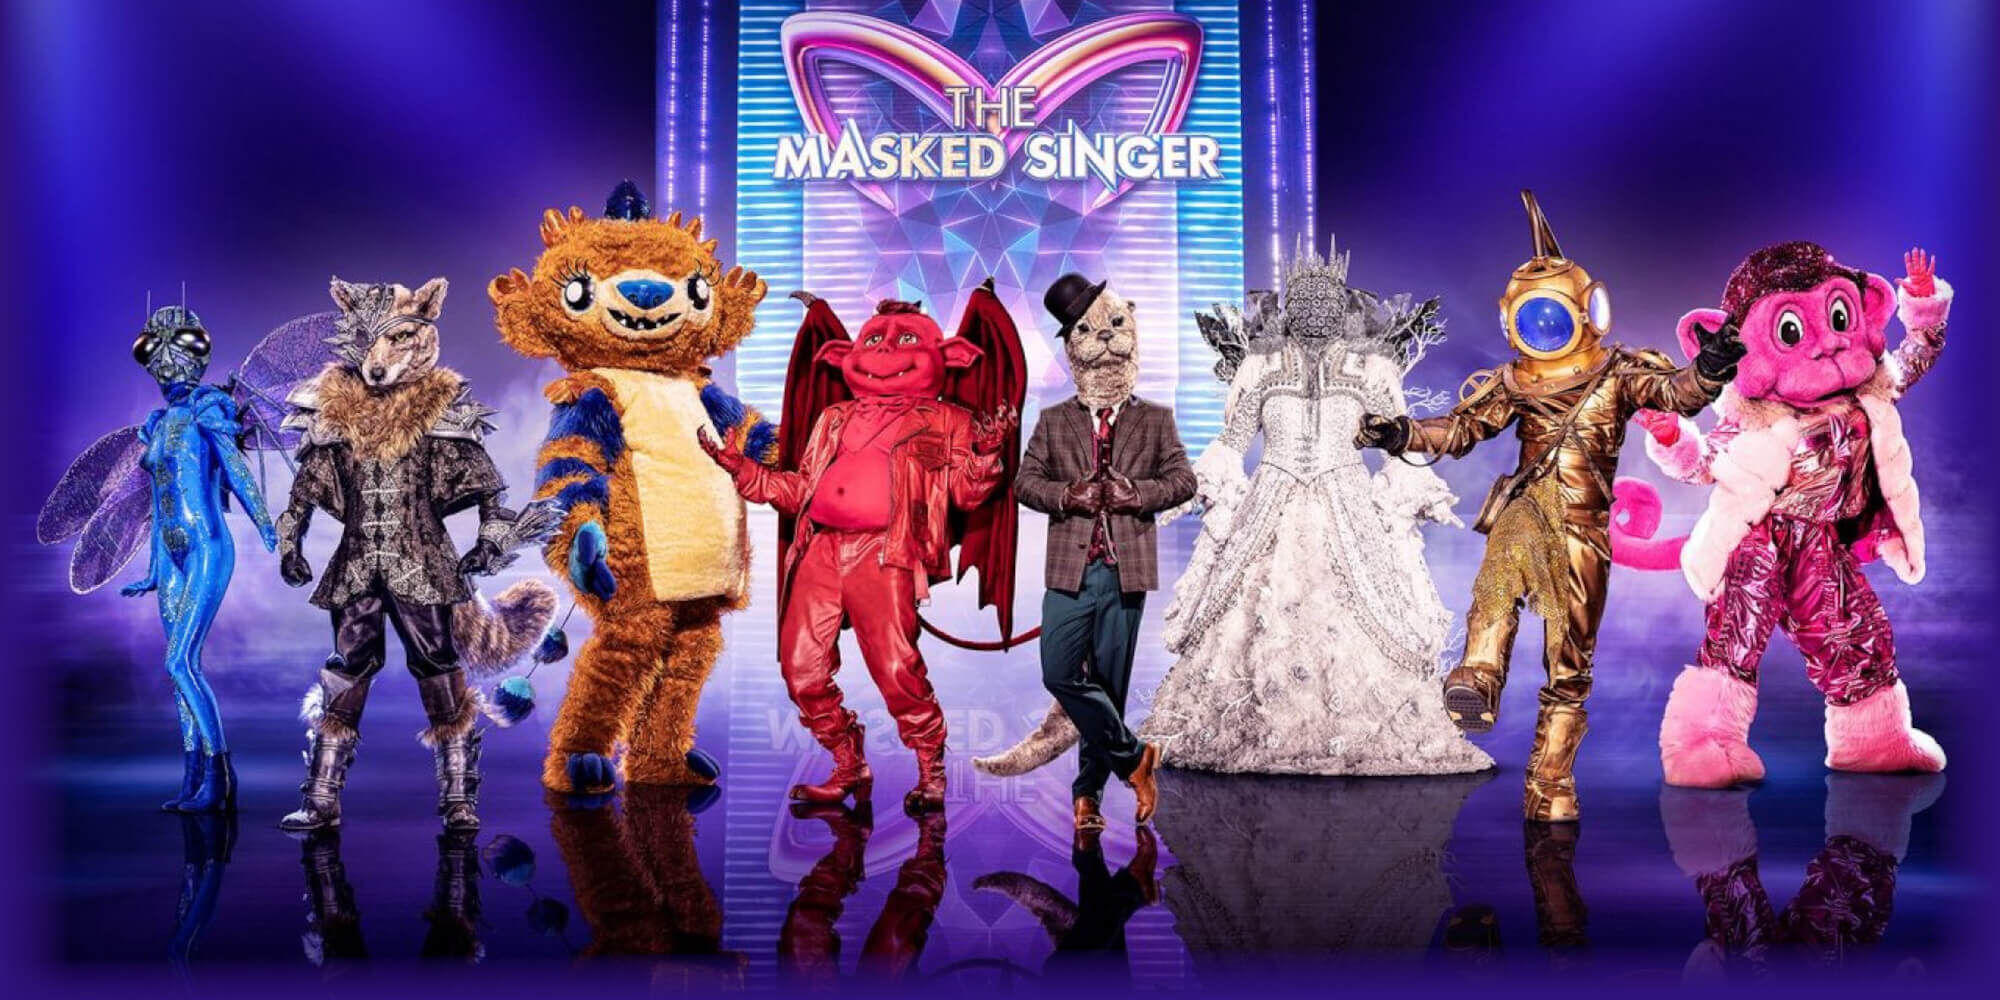 Get ready for 'The Masked Singer' season 5 Revisiting all the winners